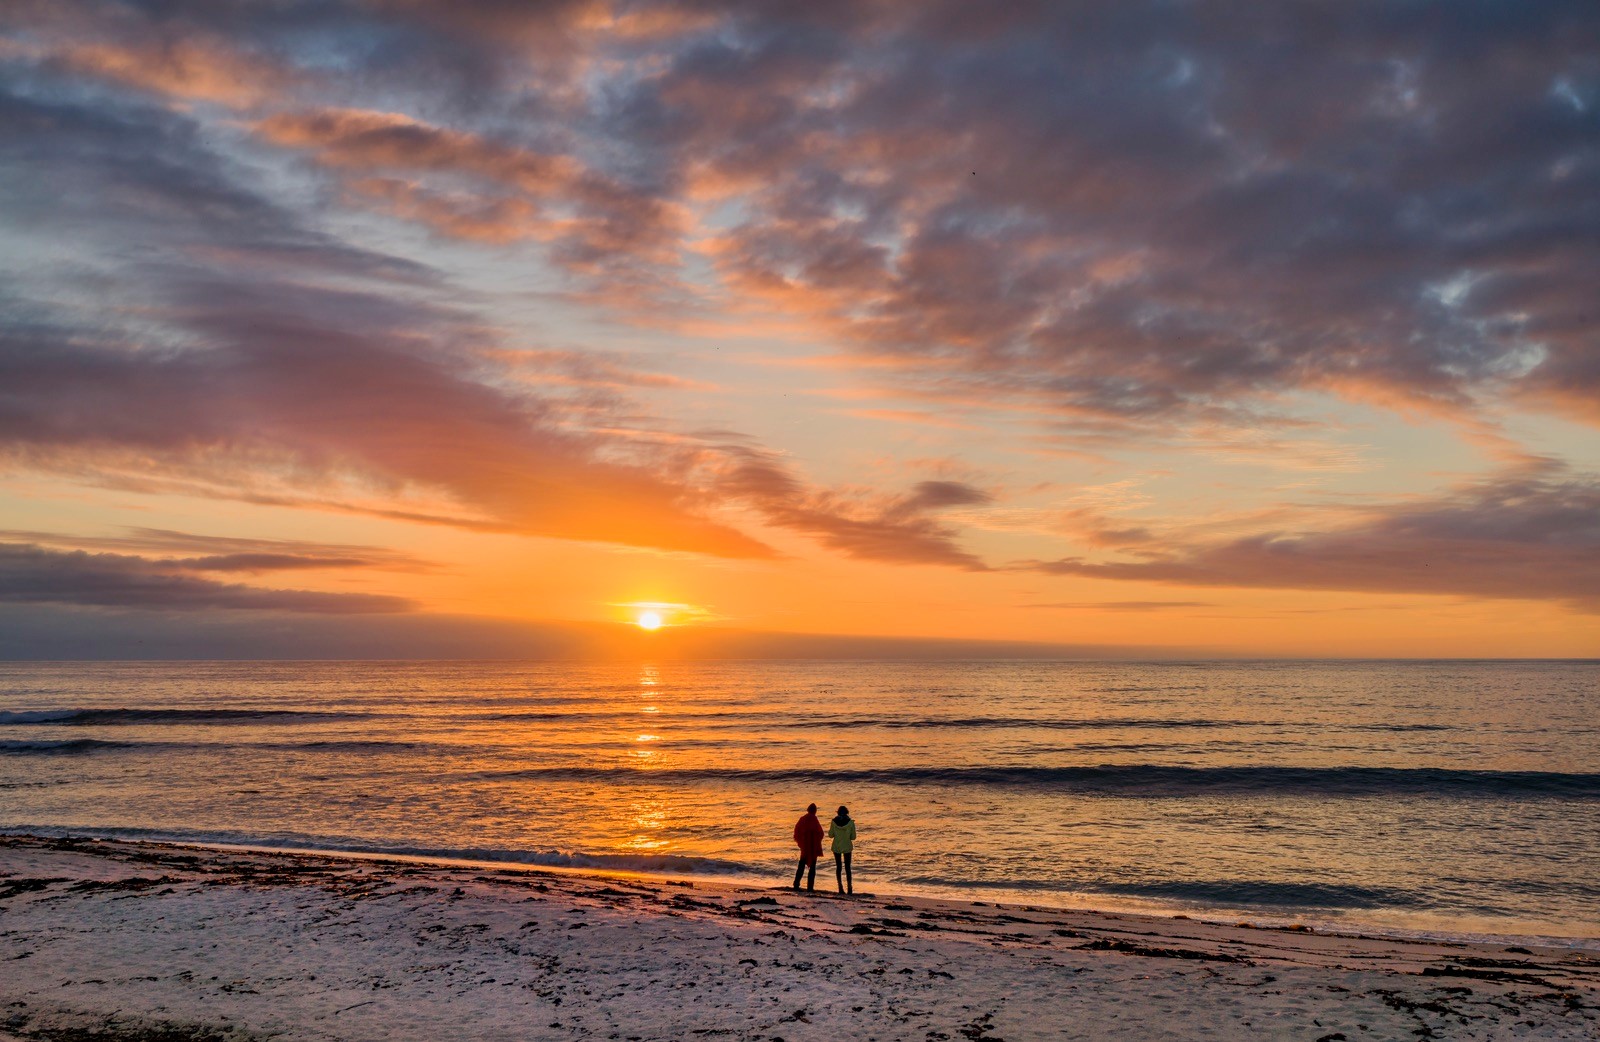 A couple at a snowy beach looking at the sunset